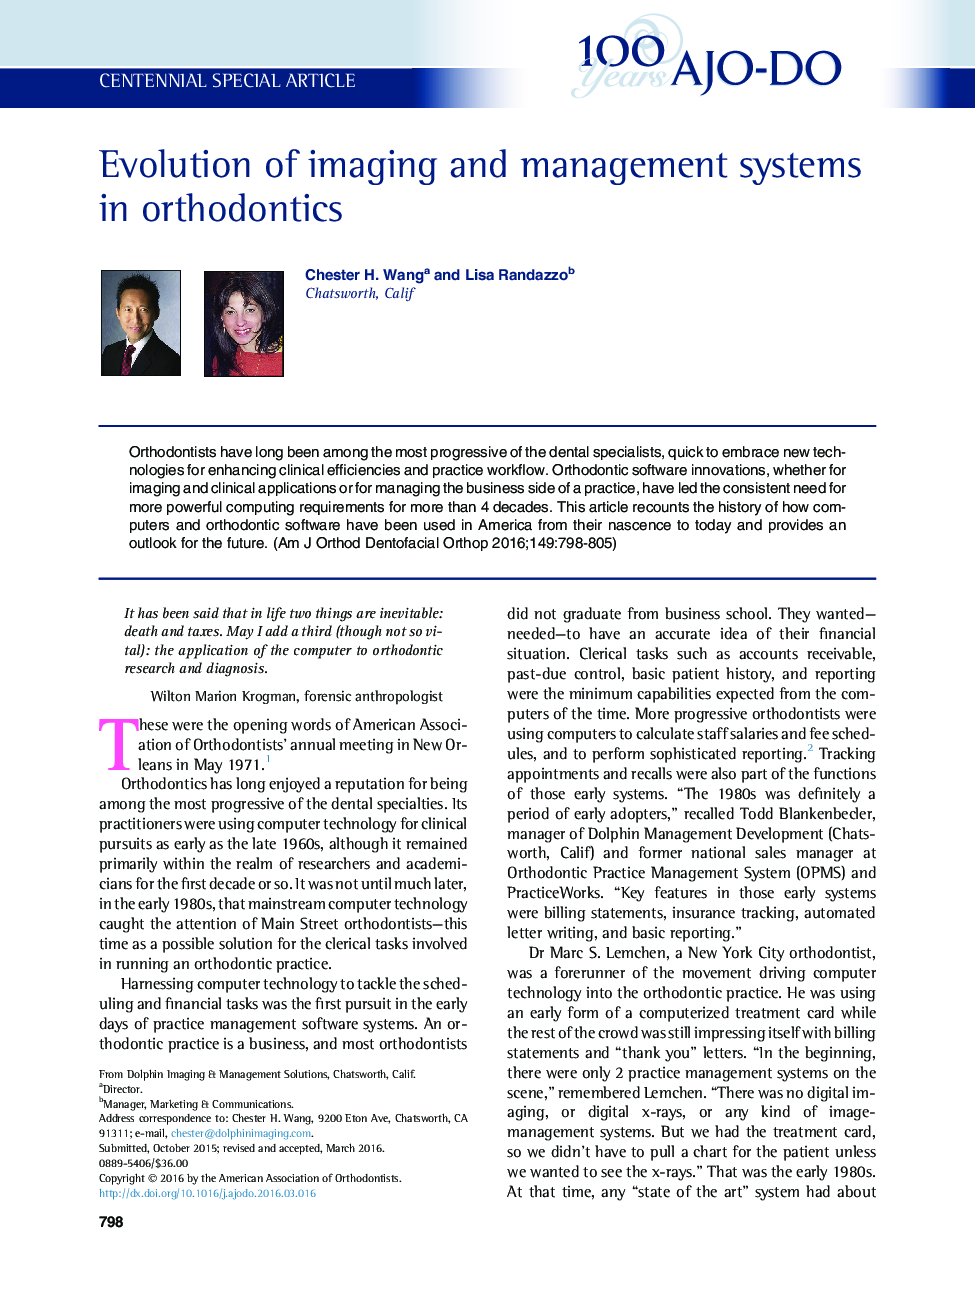 Evolution of imaging and management systems in orthodontics